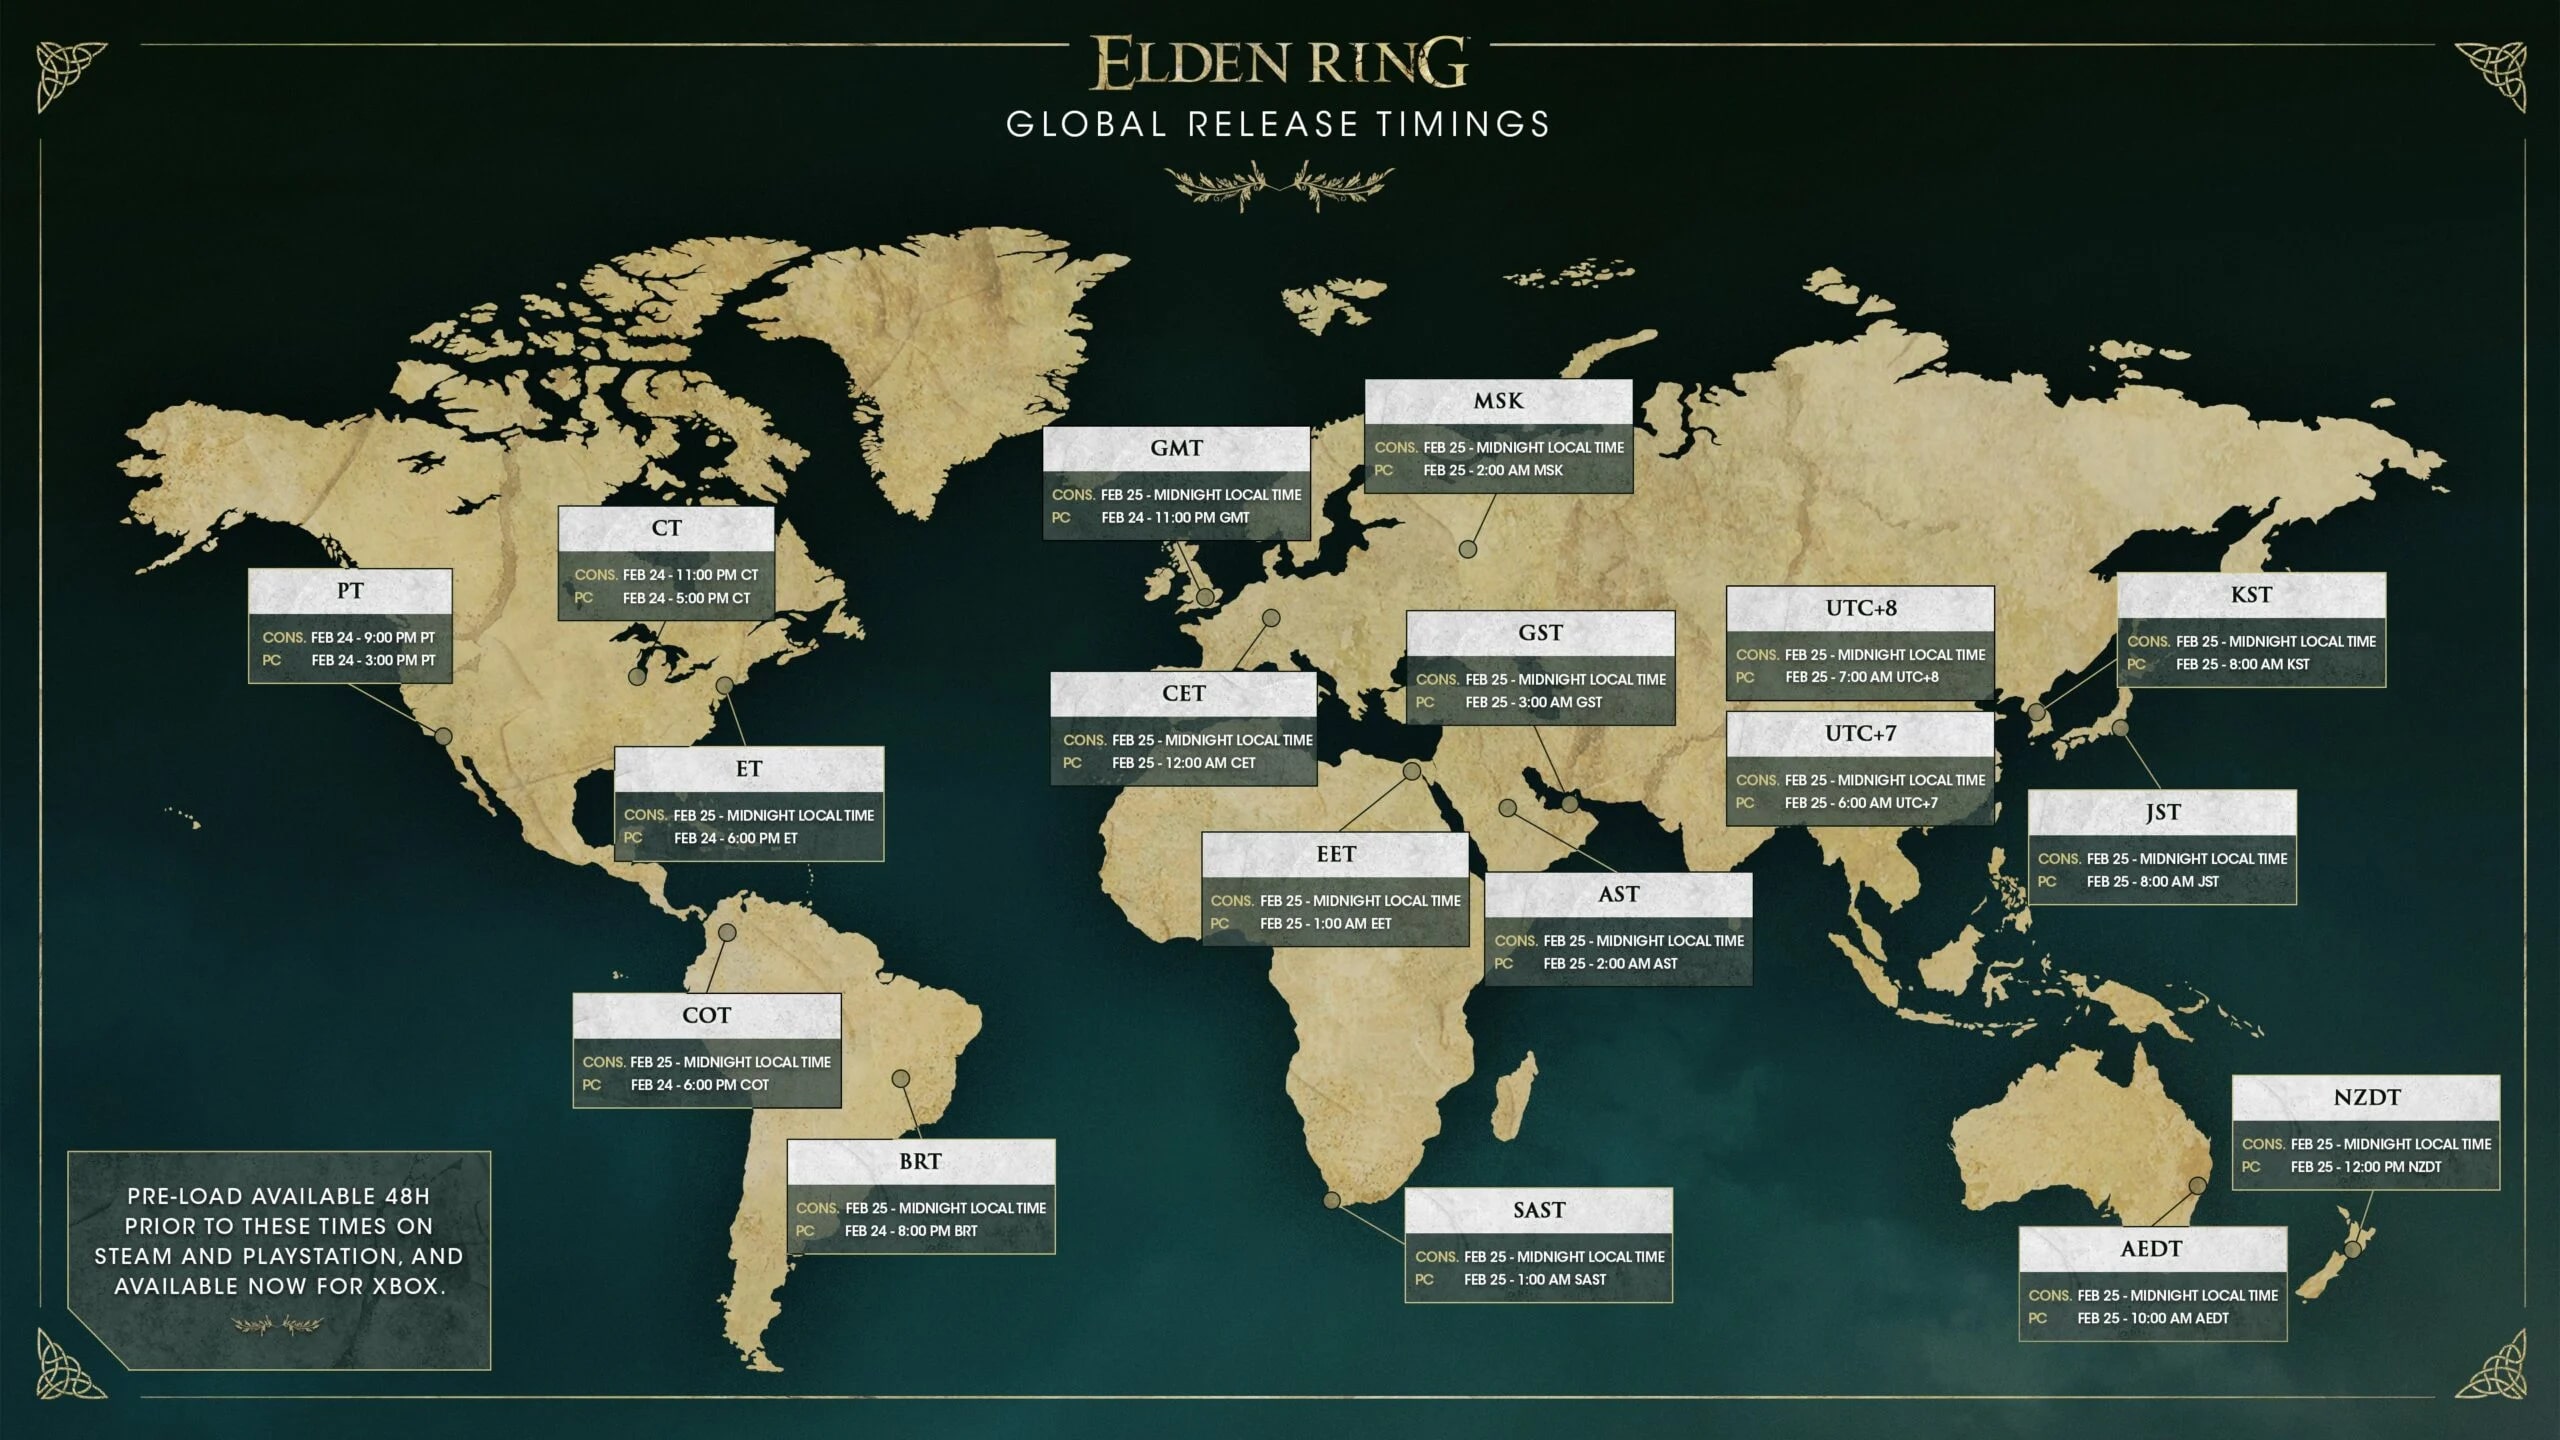 Elden ring global release times scaled 1 2